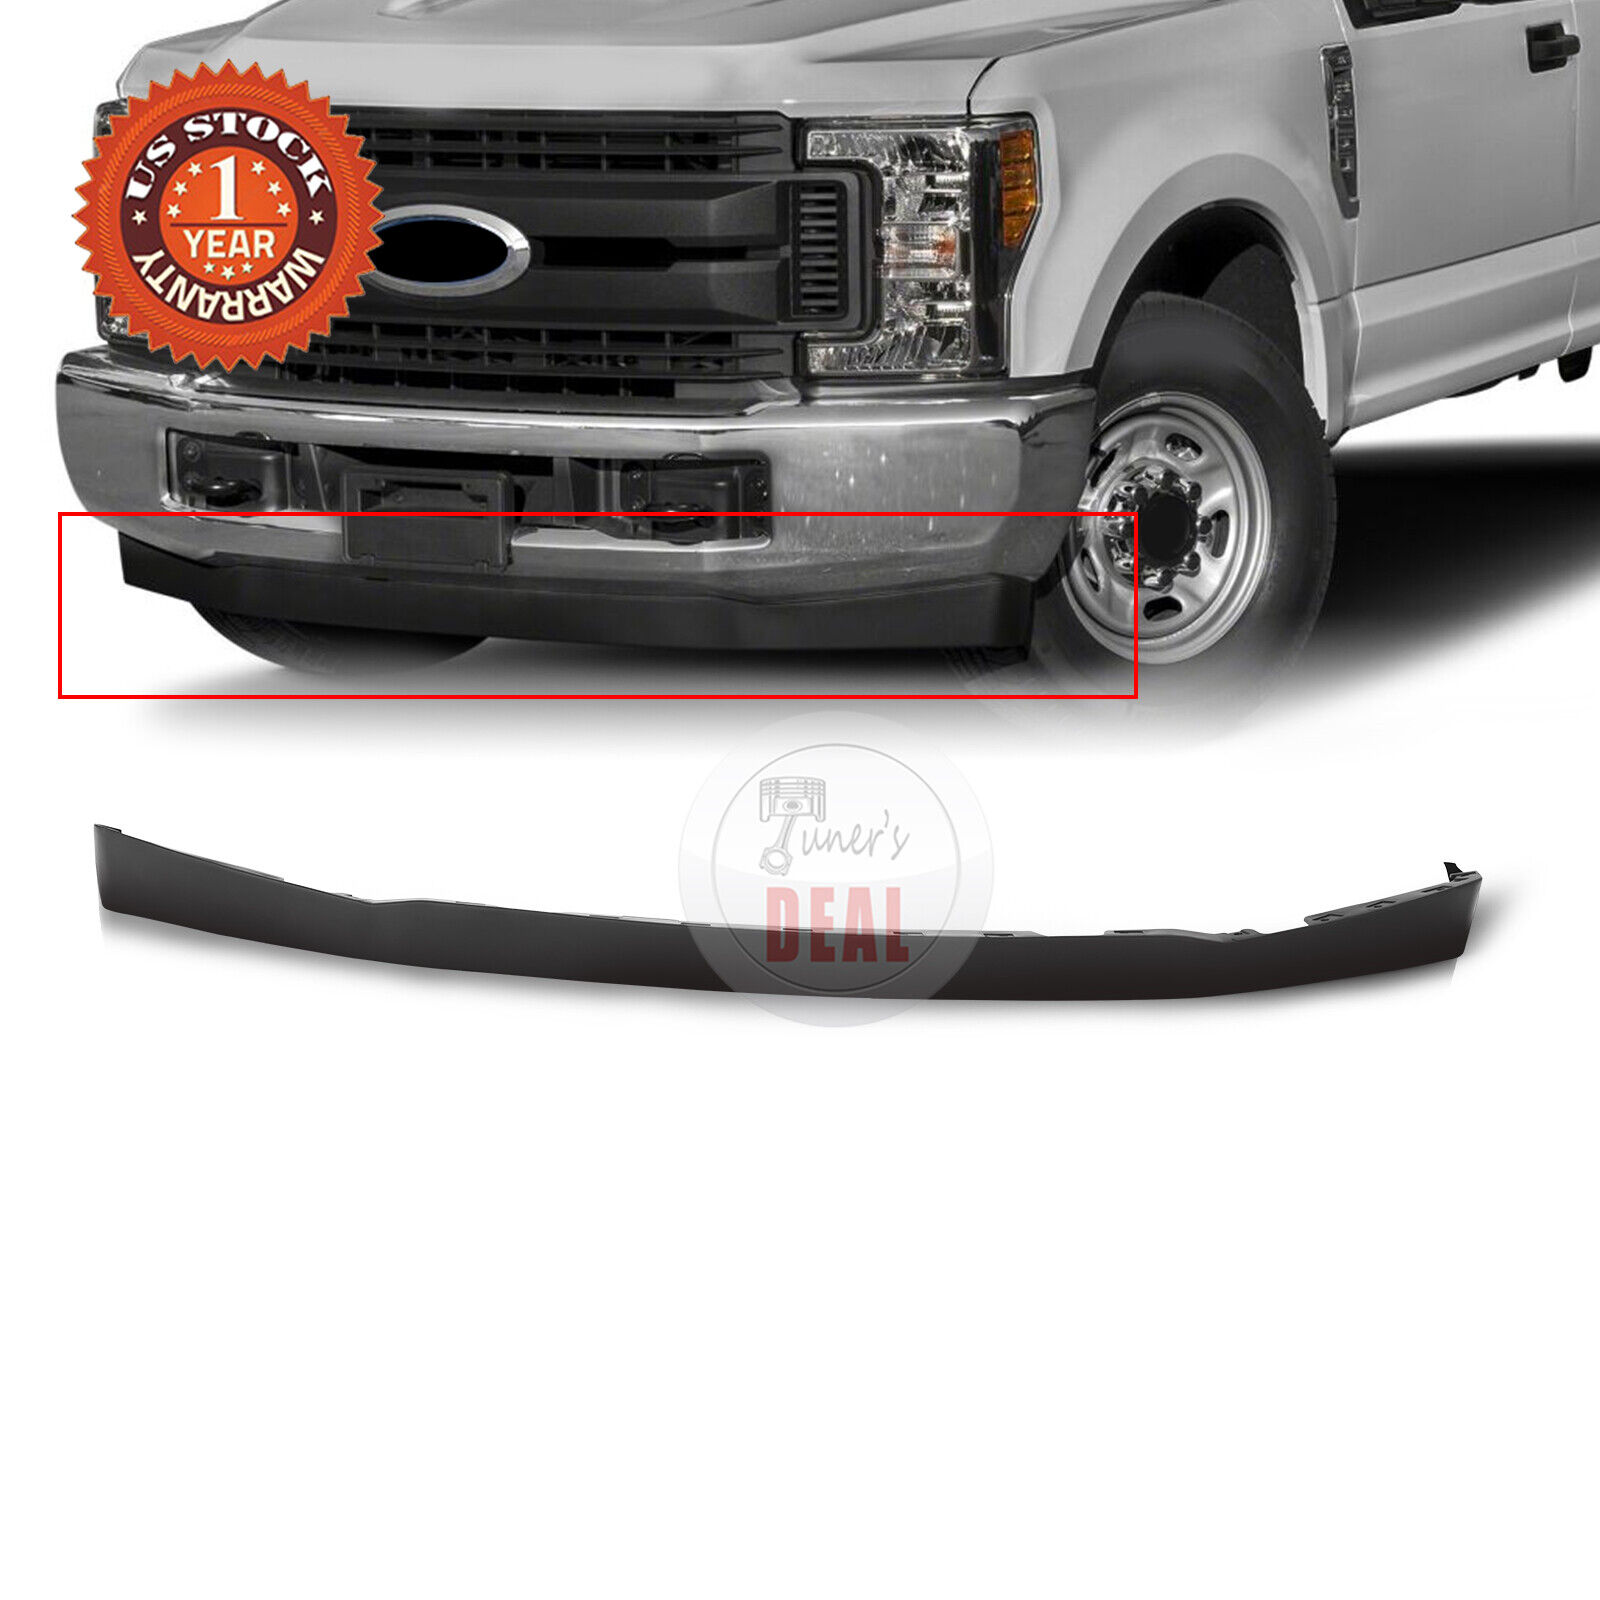 NEW Front Lower Valance For 2017-2019 Ford F-250 F-350 Super Duty 2-Wheel Drive